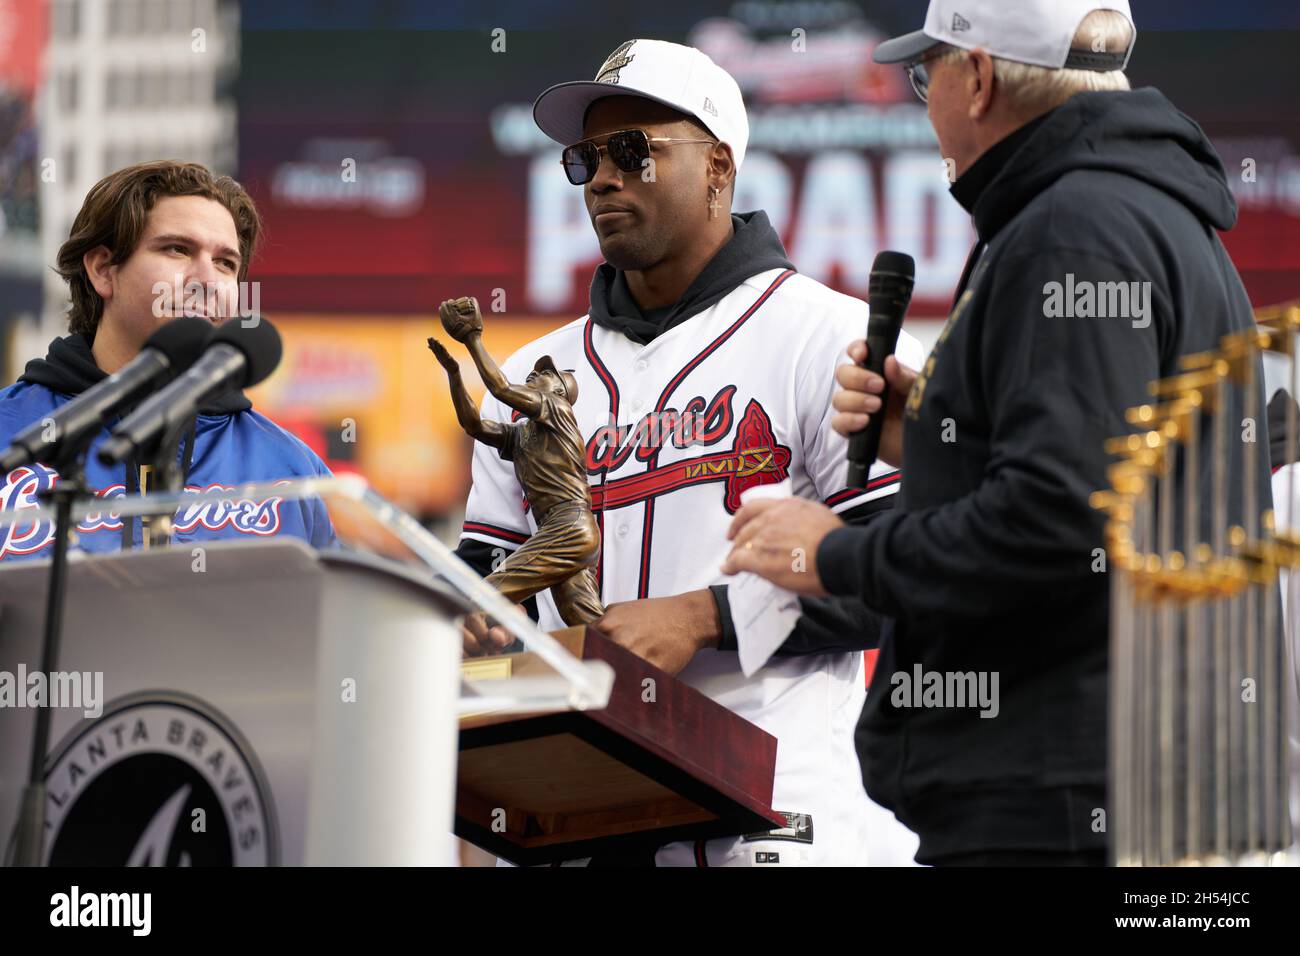 Atlanta, USA. 05th Nov, 2021. Worls Series MVP Jorge Soler addresses fans  at a ceremony after a parade to celebrate the World Series Championship for  the Atlanta Braves at Truist Park in